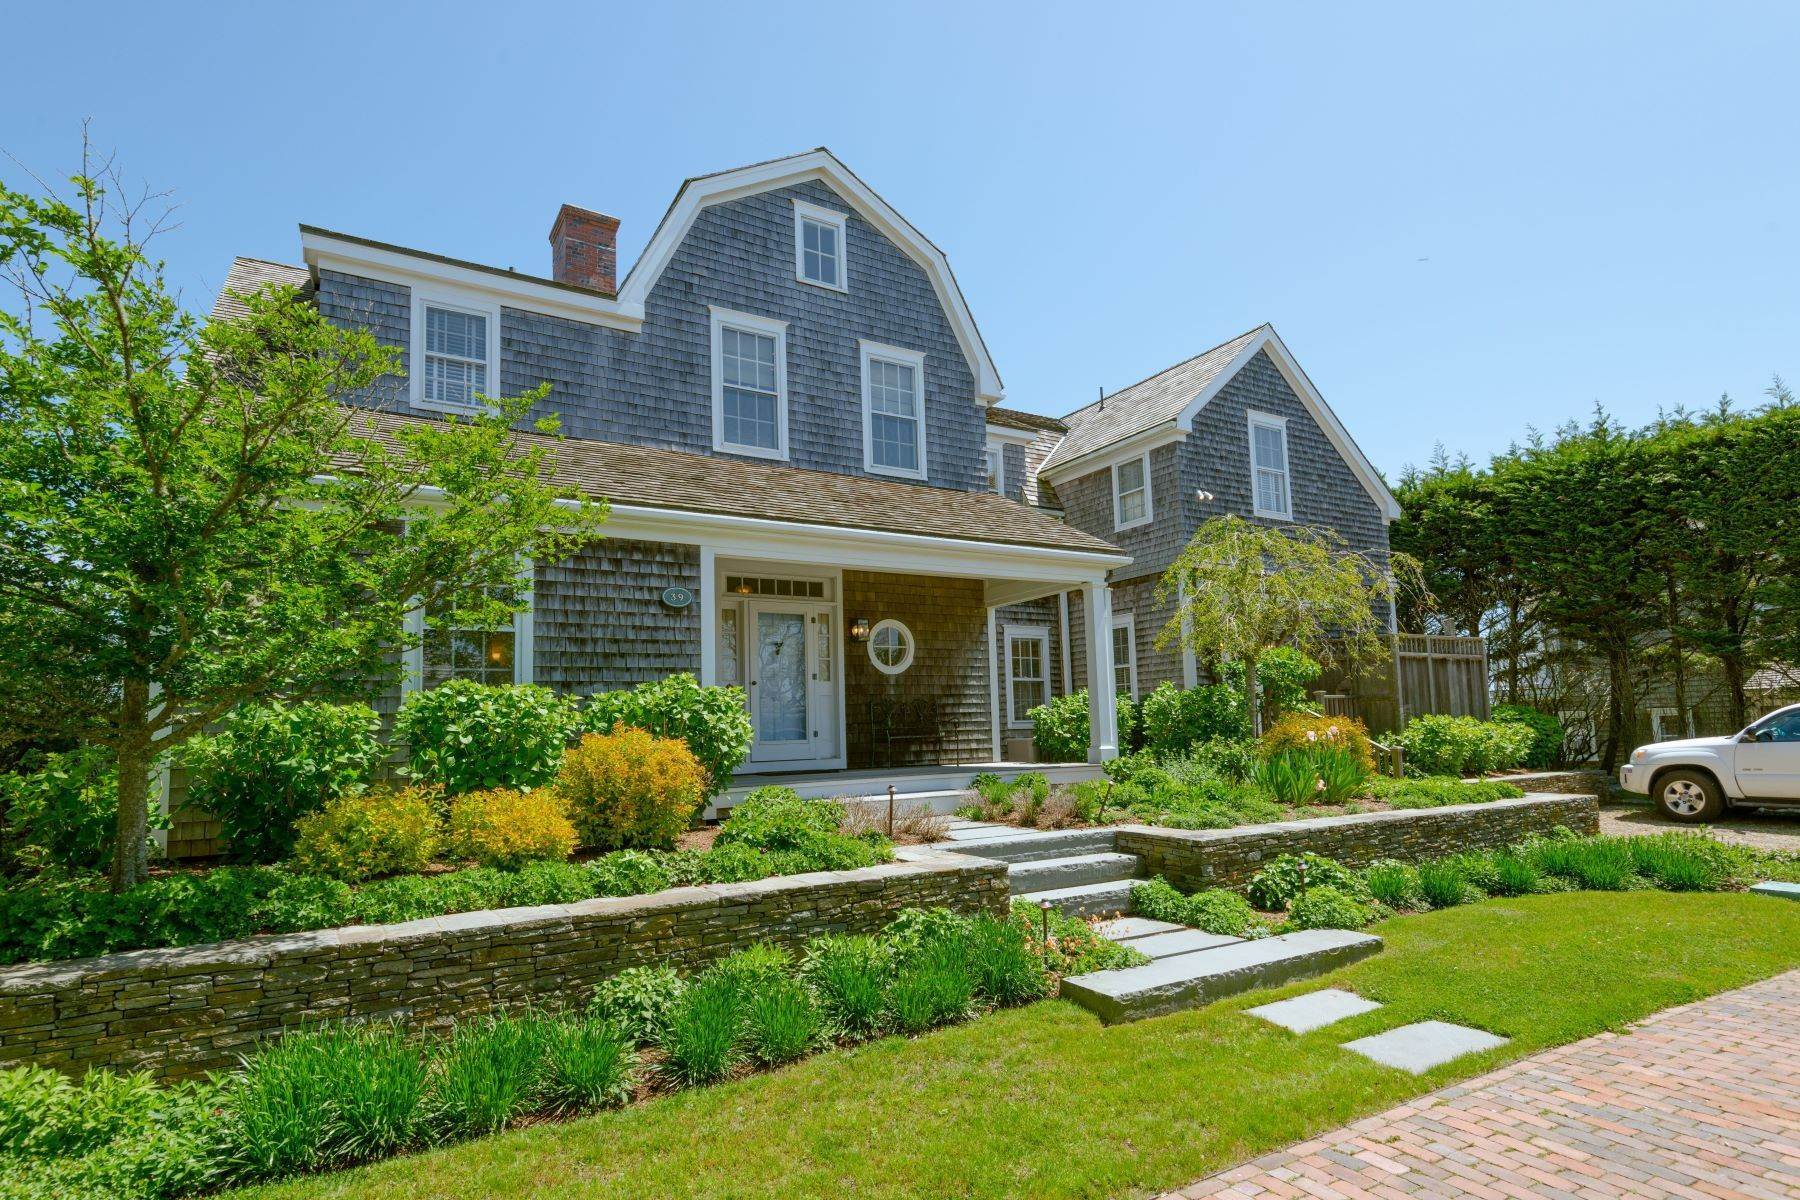 Single Family Homes for Sale at Commanding Ocean Views 39 Cliff Road, 37 Cliff Road Nantucket, Massachusetts 02554 United States